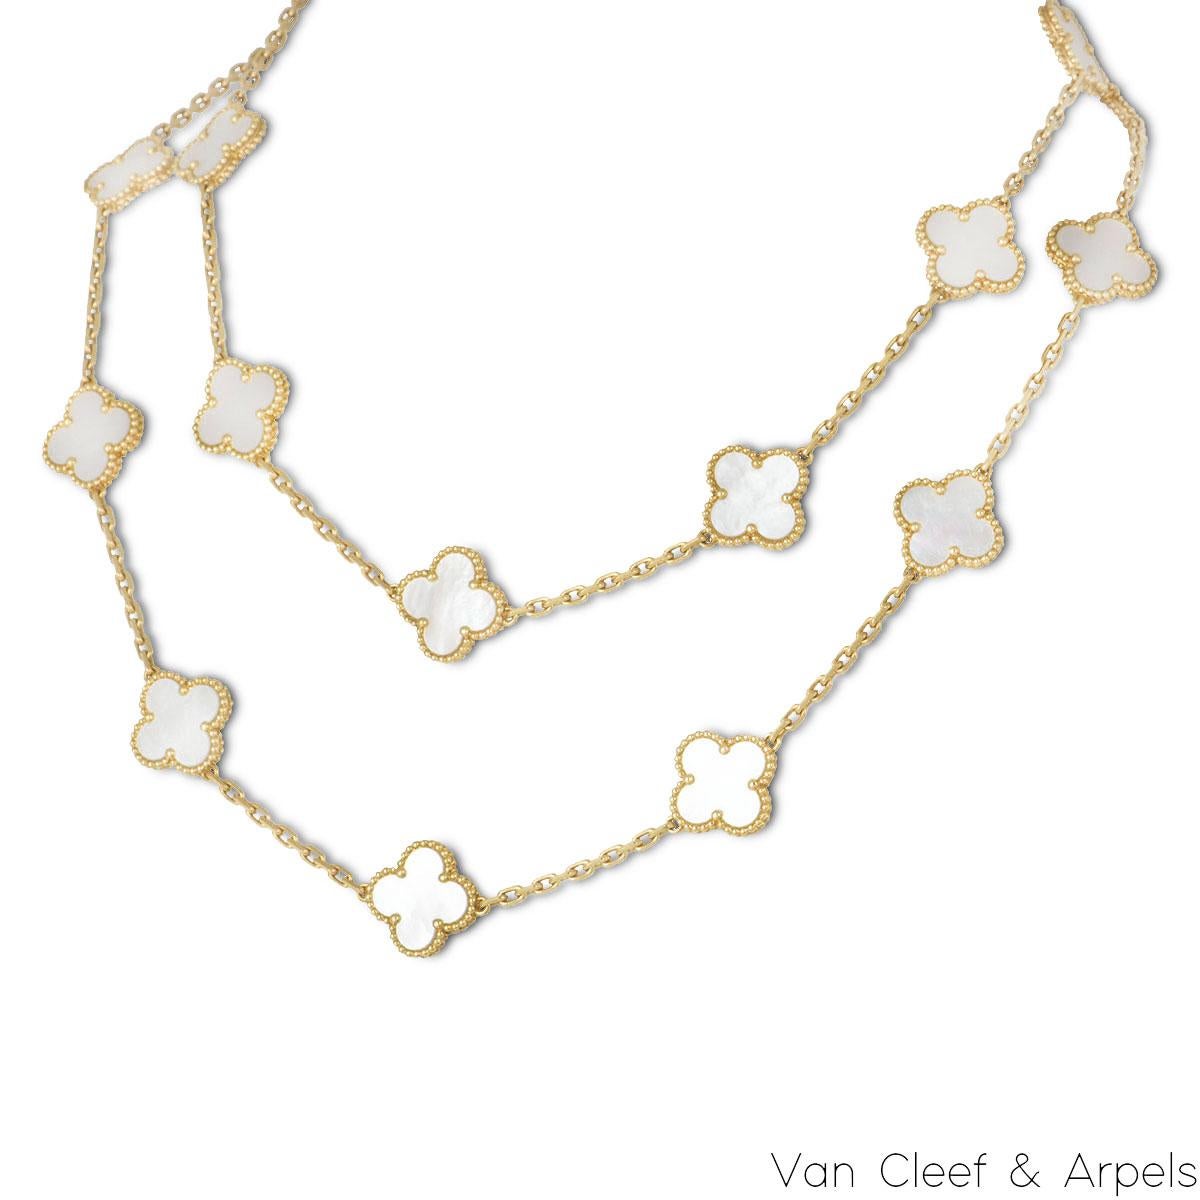 An 18k yellow gold mother of pearl necklace from the Vintage Alhambra collection by Van Cleef & Arpels. The necklace features 20 iconic 4-leaf clover motifs, each set with a beaded edge and a mother of pearl inlay, set throughout the length of the